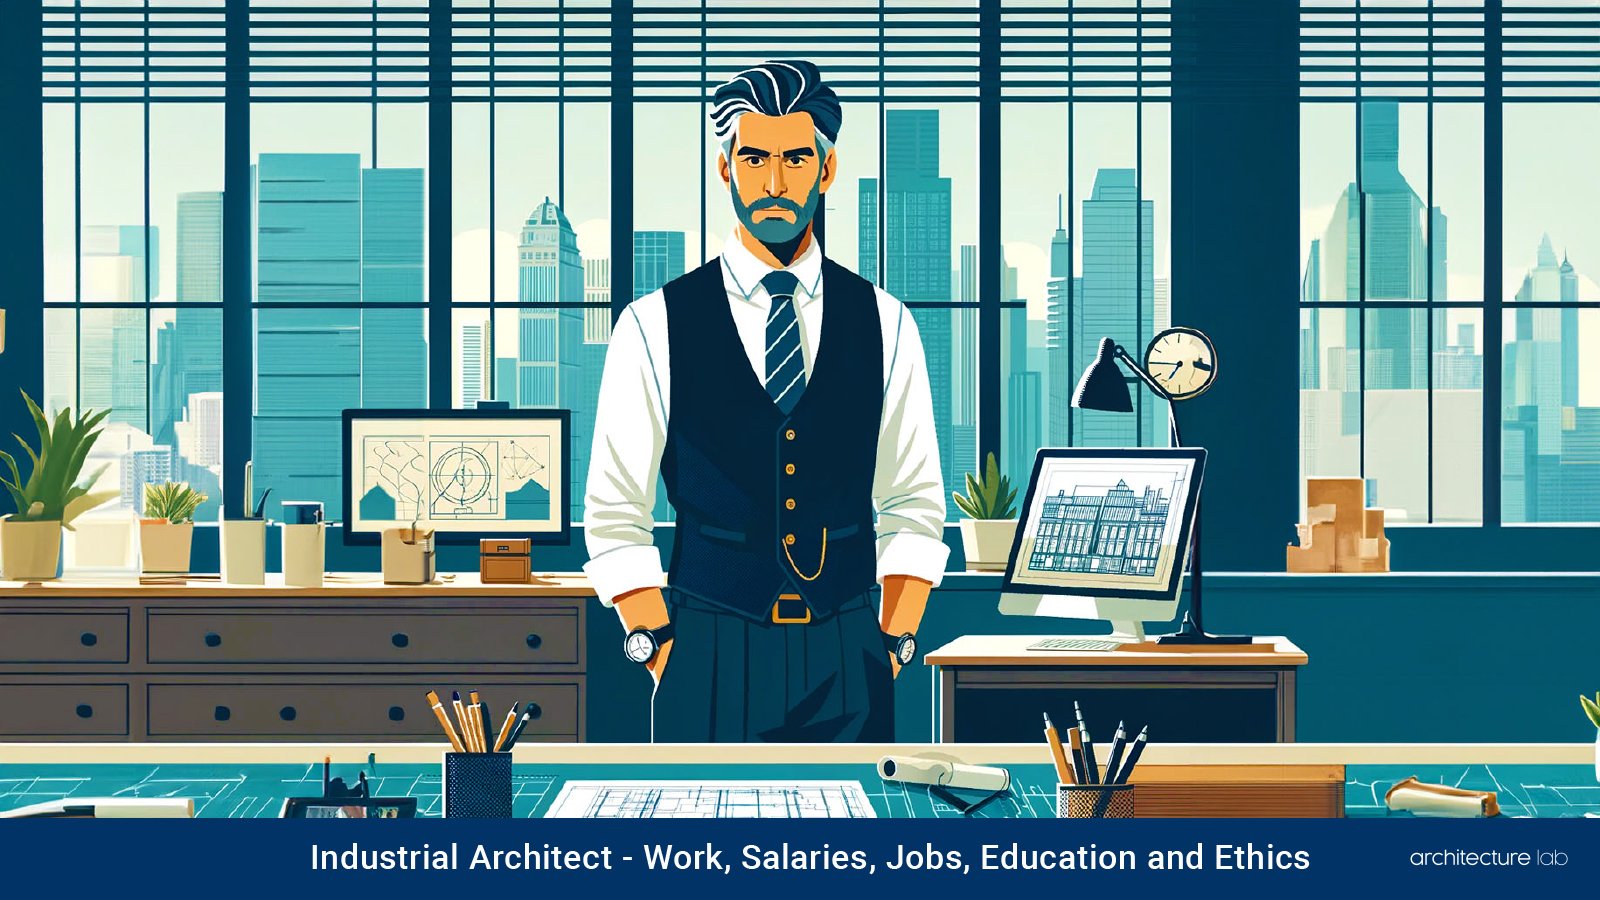 Industrial architect: work, salaries, jobs, education and ethics